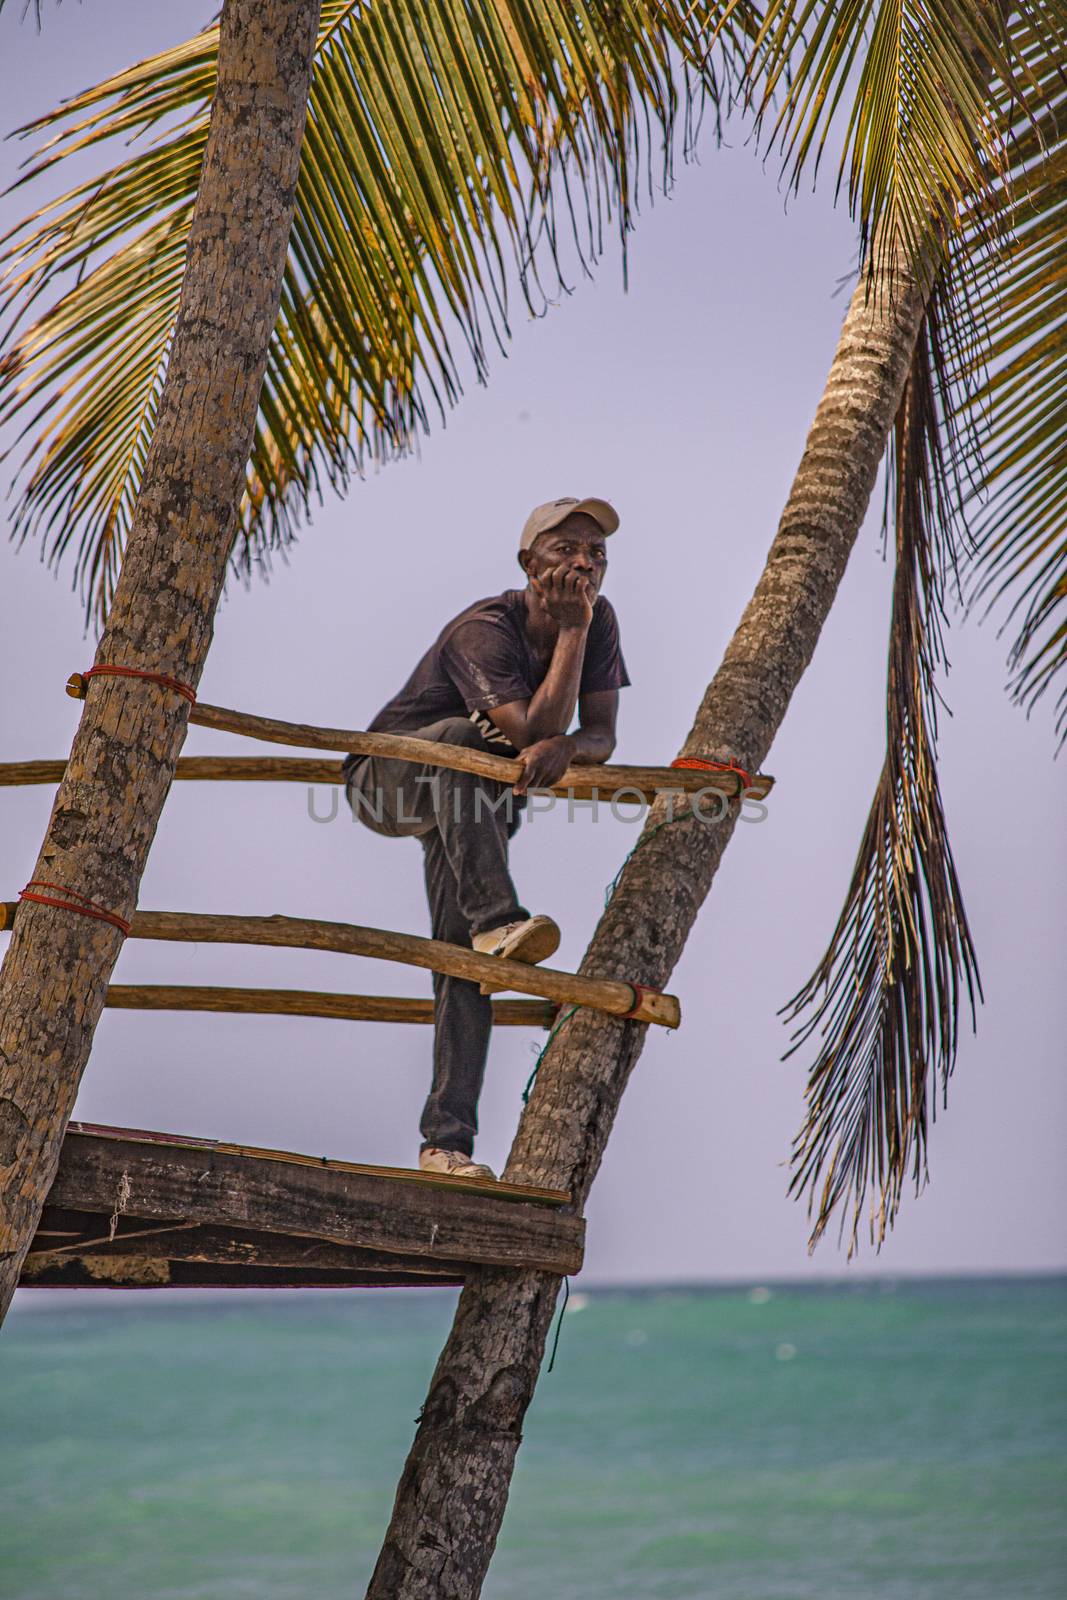 Dominican man looks at the sea 5 by pippocarlot